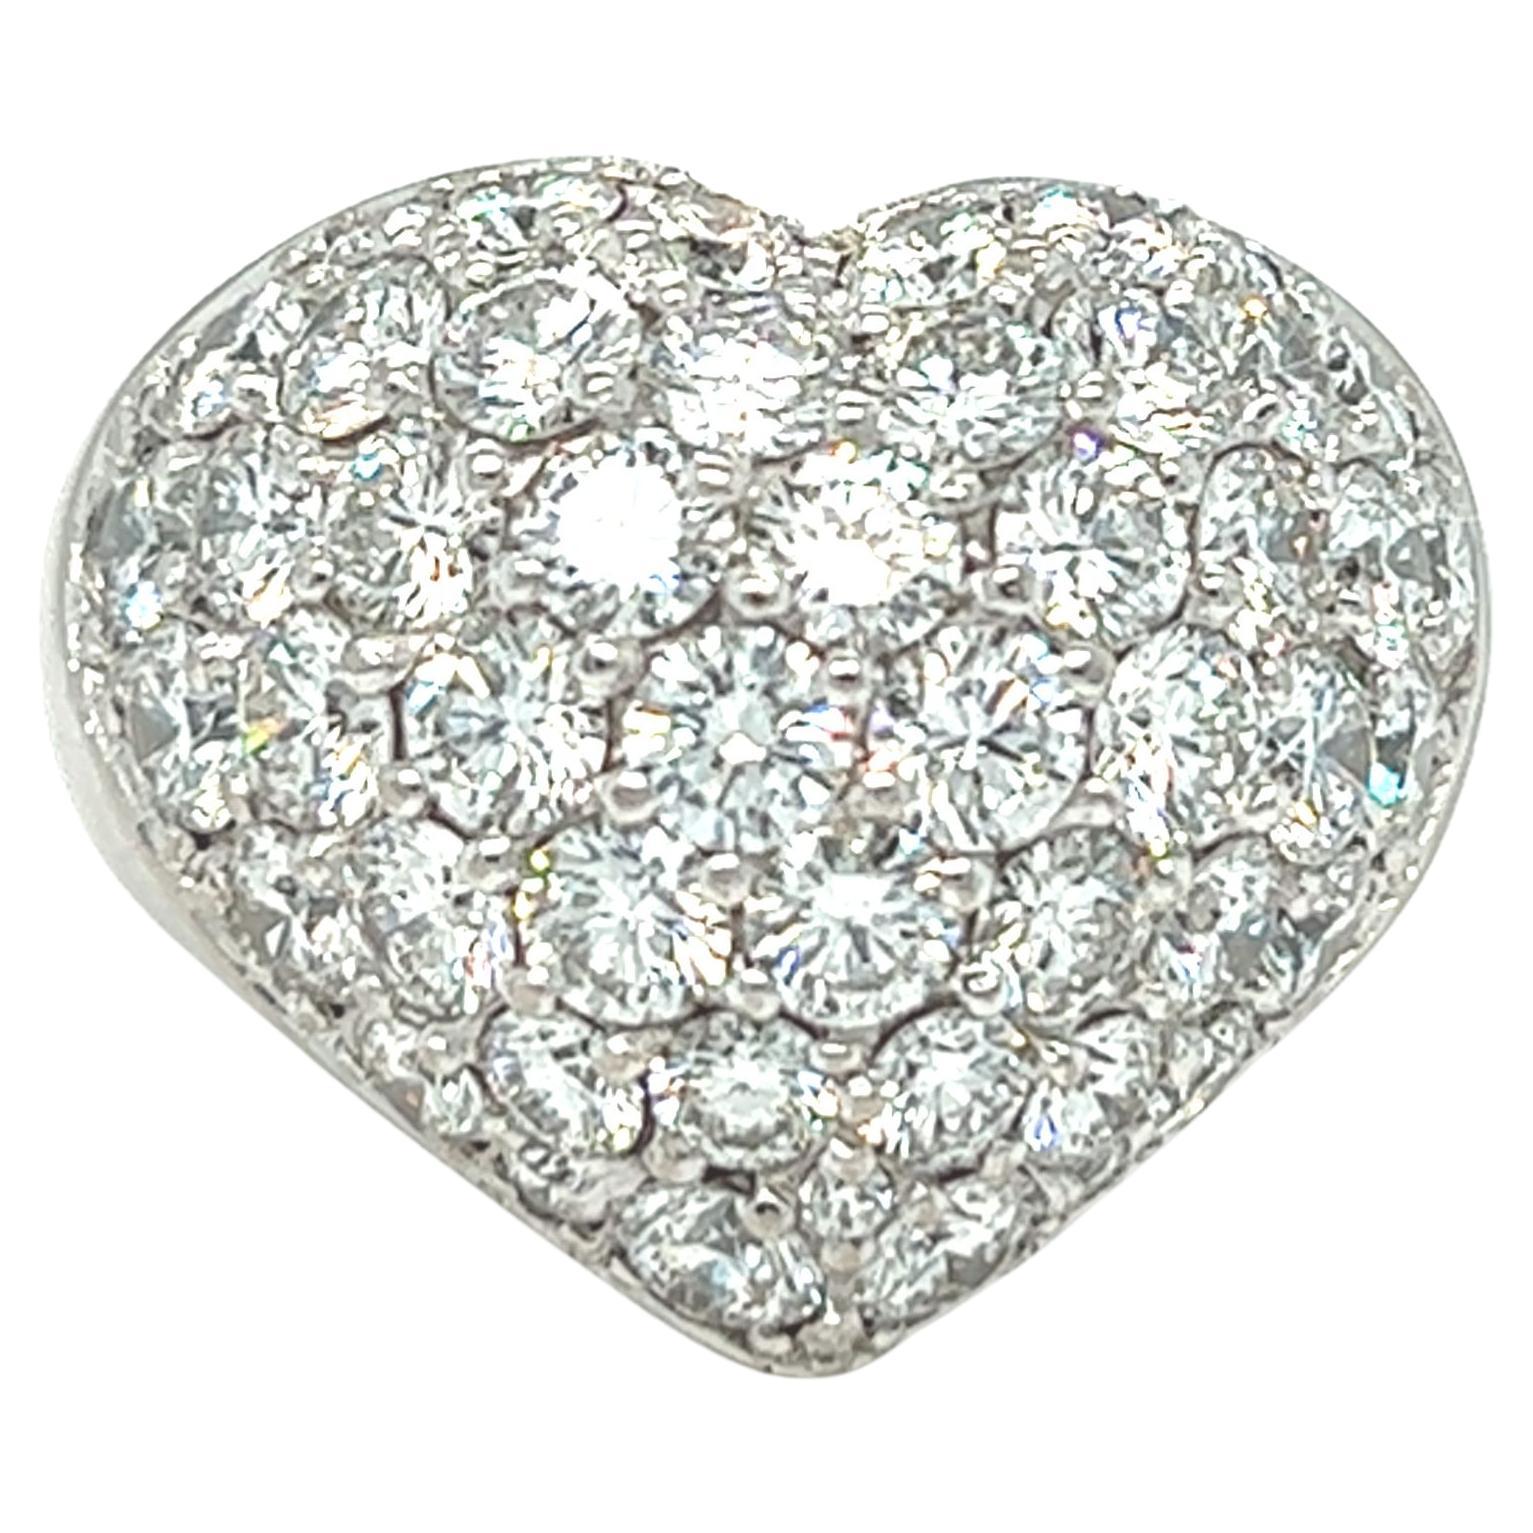 This rare-find classic LOVE heart shaped ring by Chopard features approximately 6 carats of colorless diamond. Round brilliant cut diamonds are pavé set into a beautiful dome heart. The LOVE is spelled out and engraved inside the ring. The ring is